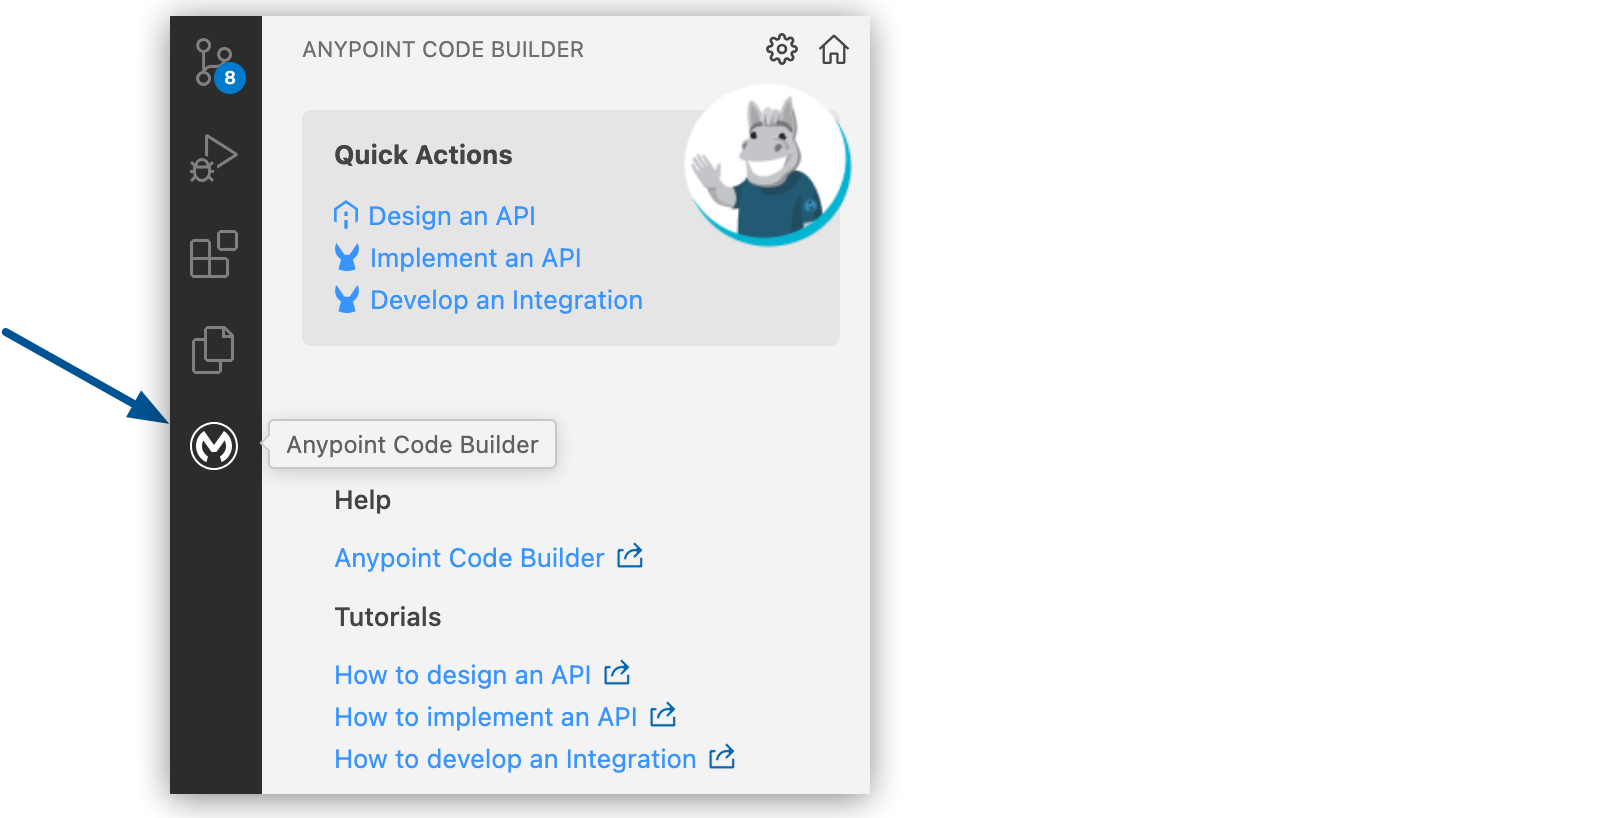 MuleSoft icon for Anypoint Code Builder in the activity bar